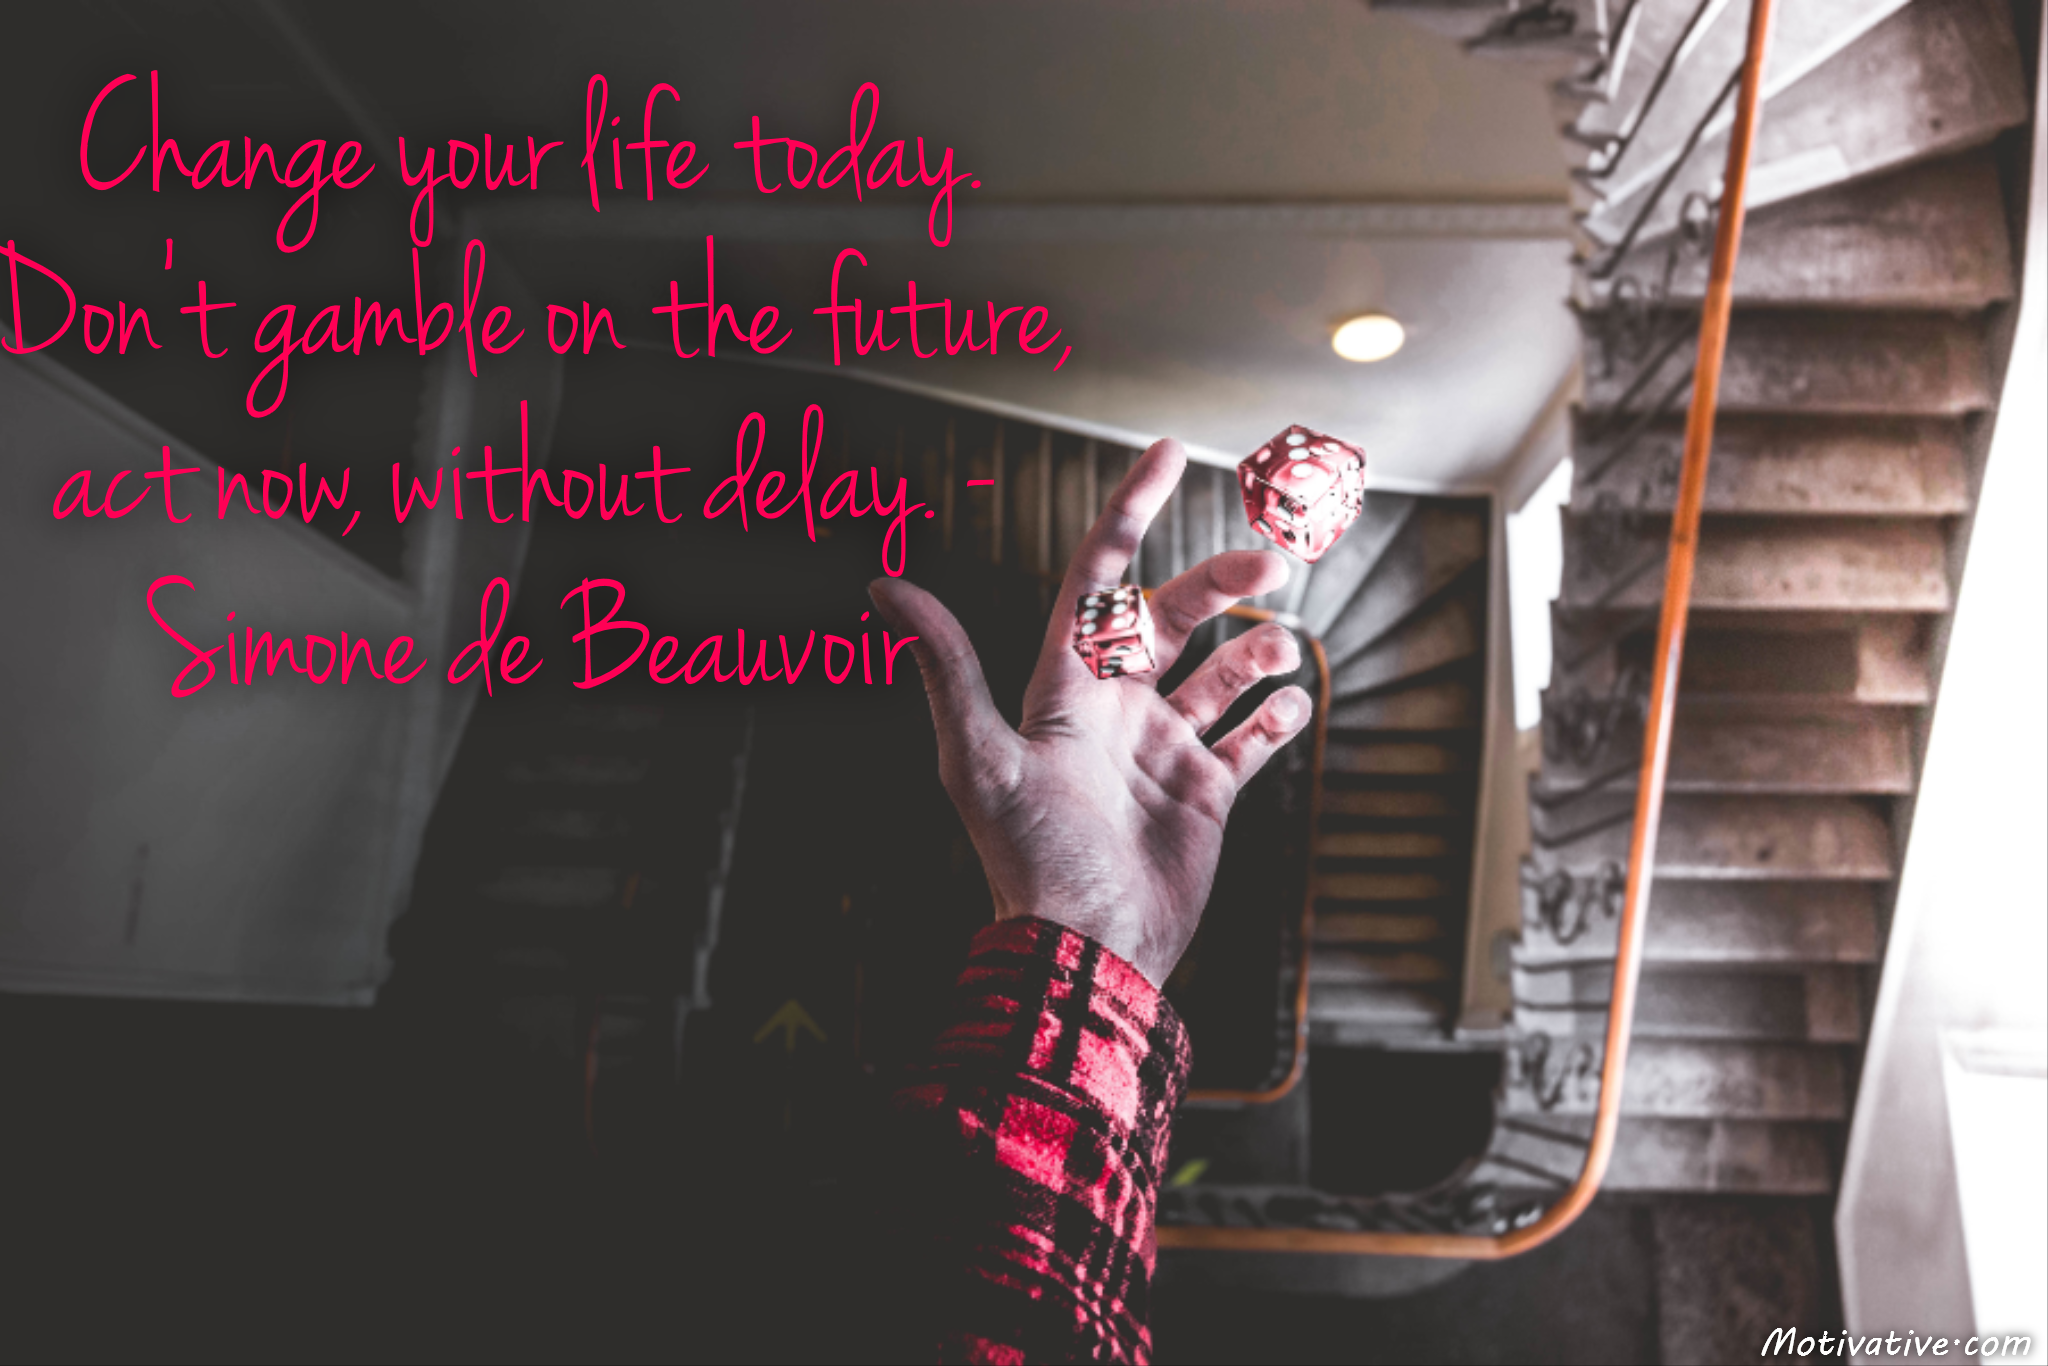 Change your life today. Don’t gamble on the future, act now, without delay. – Simone de Beauvoir